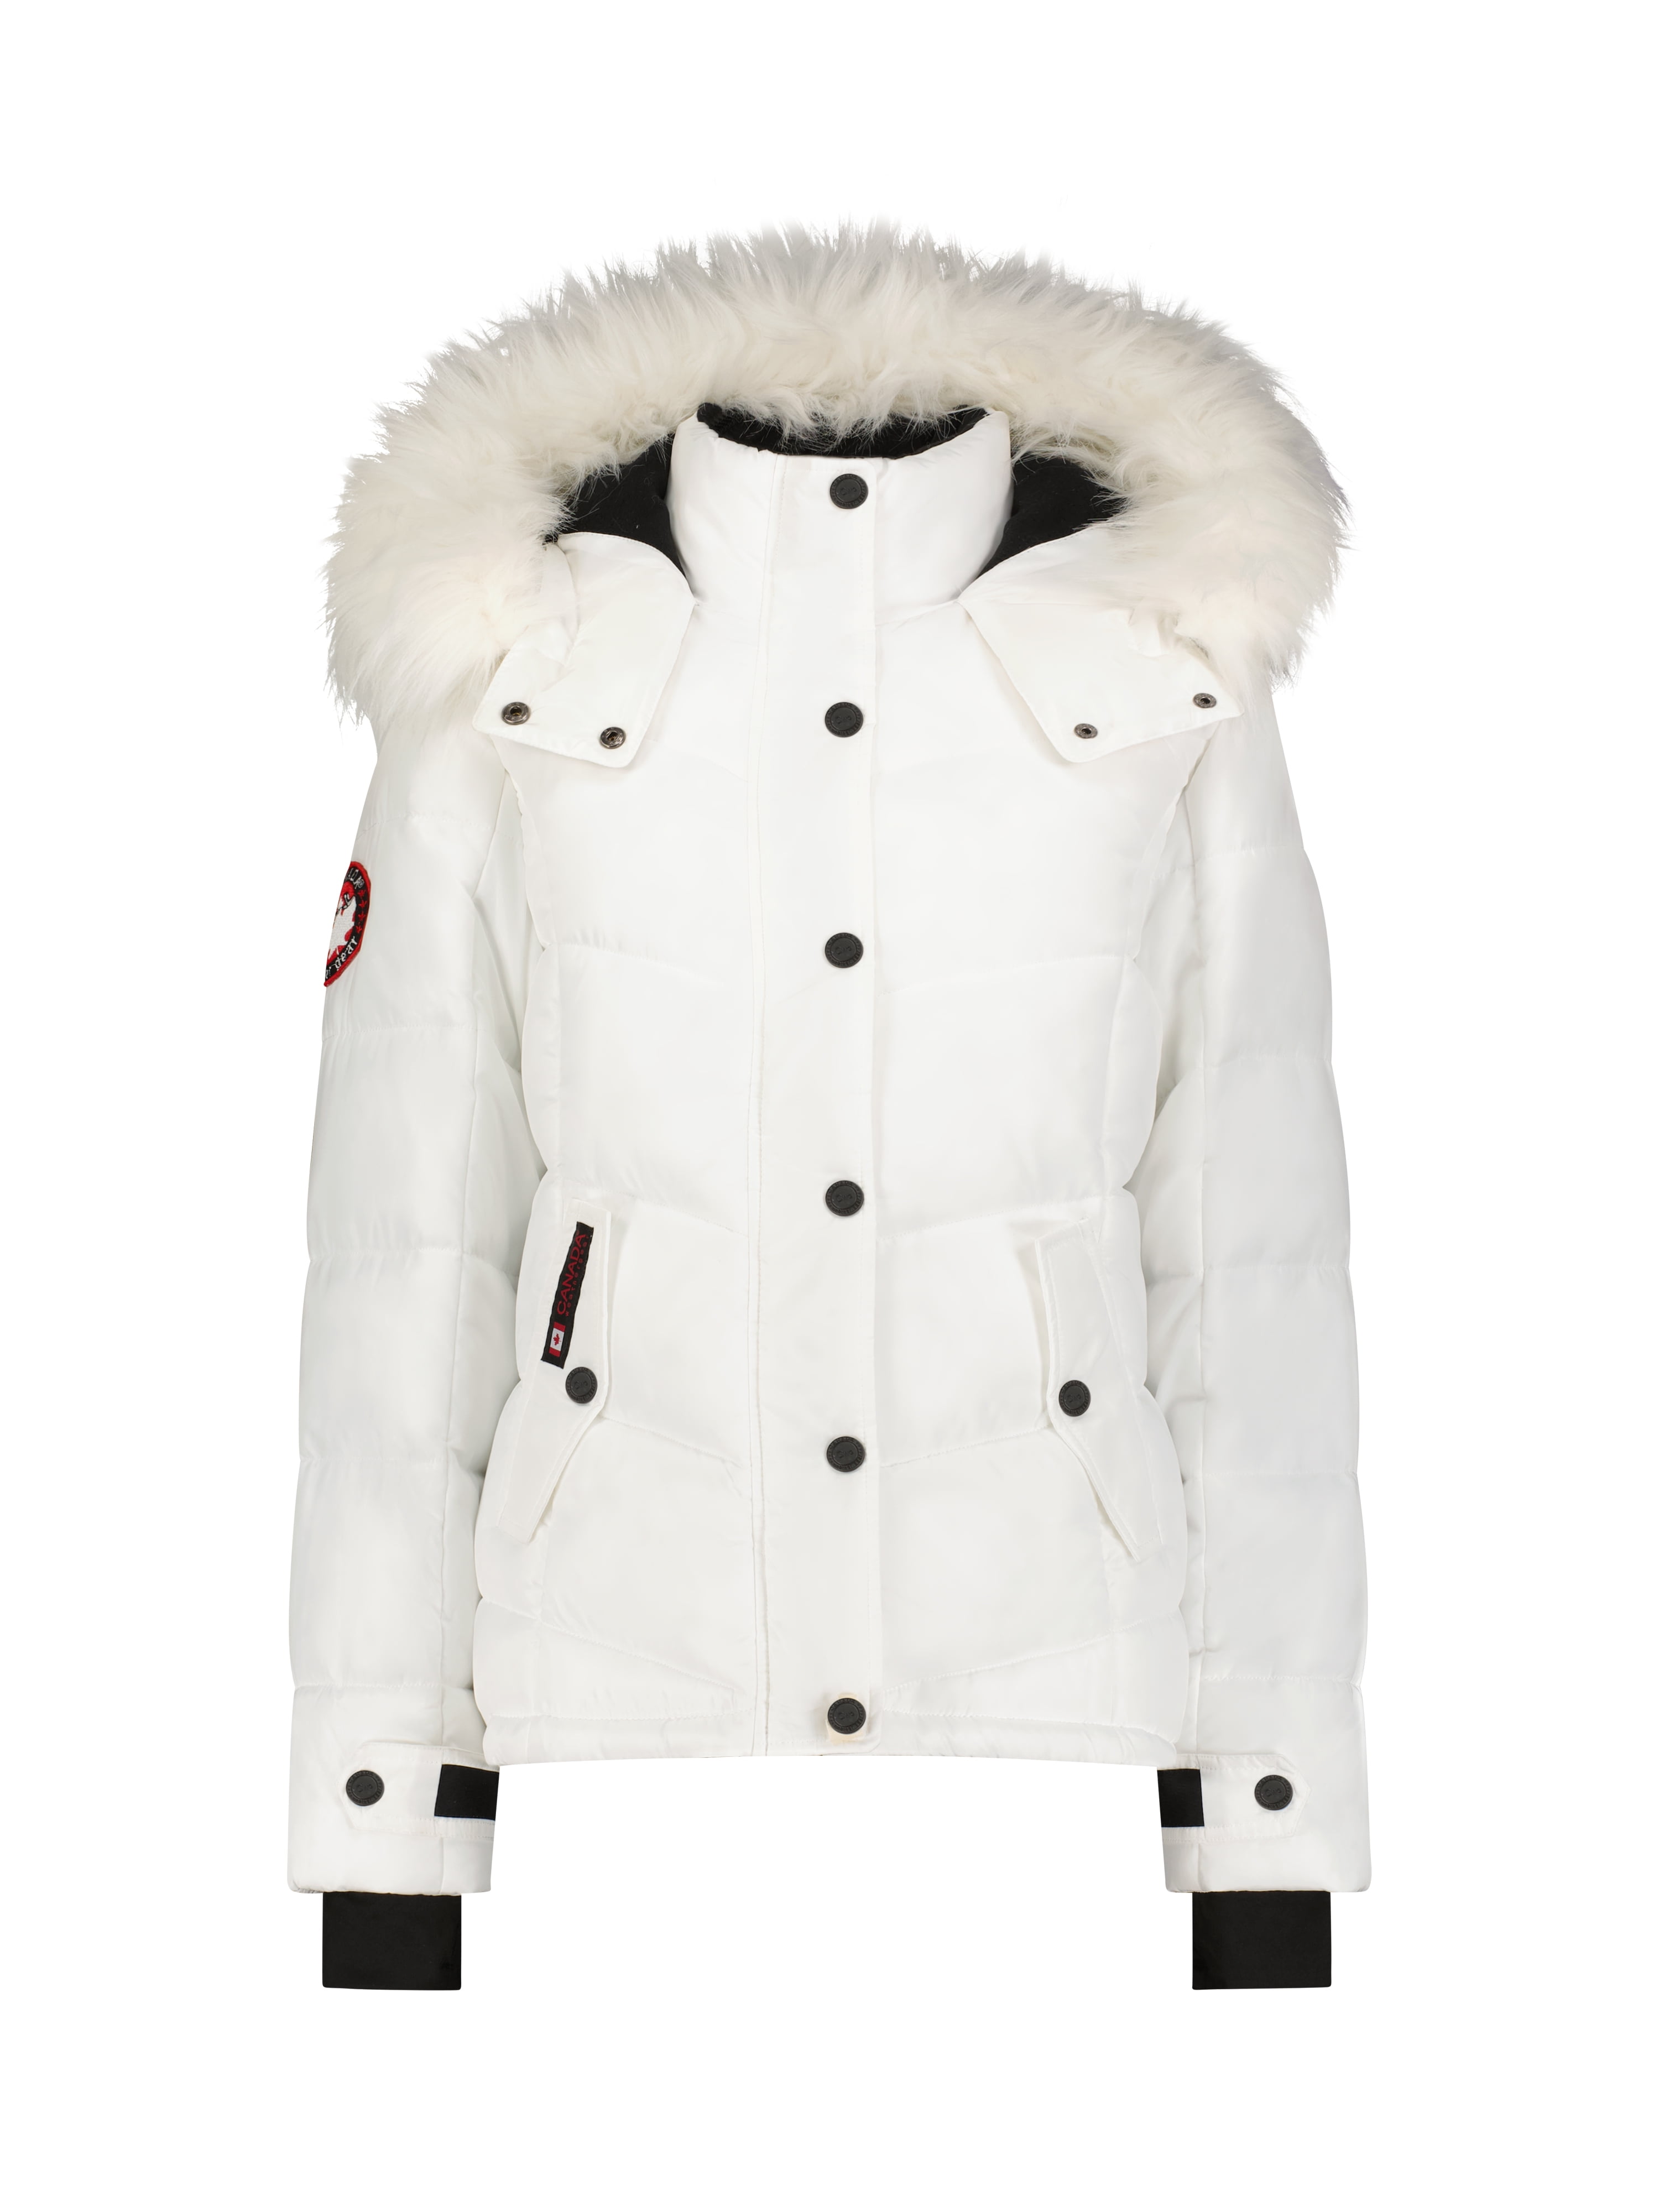 Canada Weather Gear Women's Classic Puffer Jacket with Faux Fur Trim ...